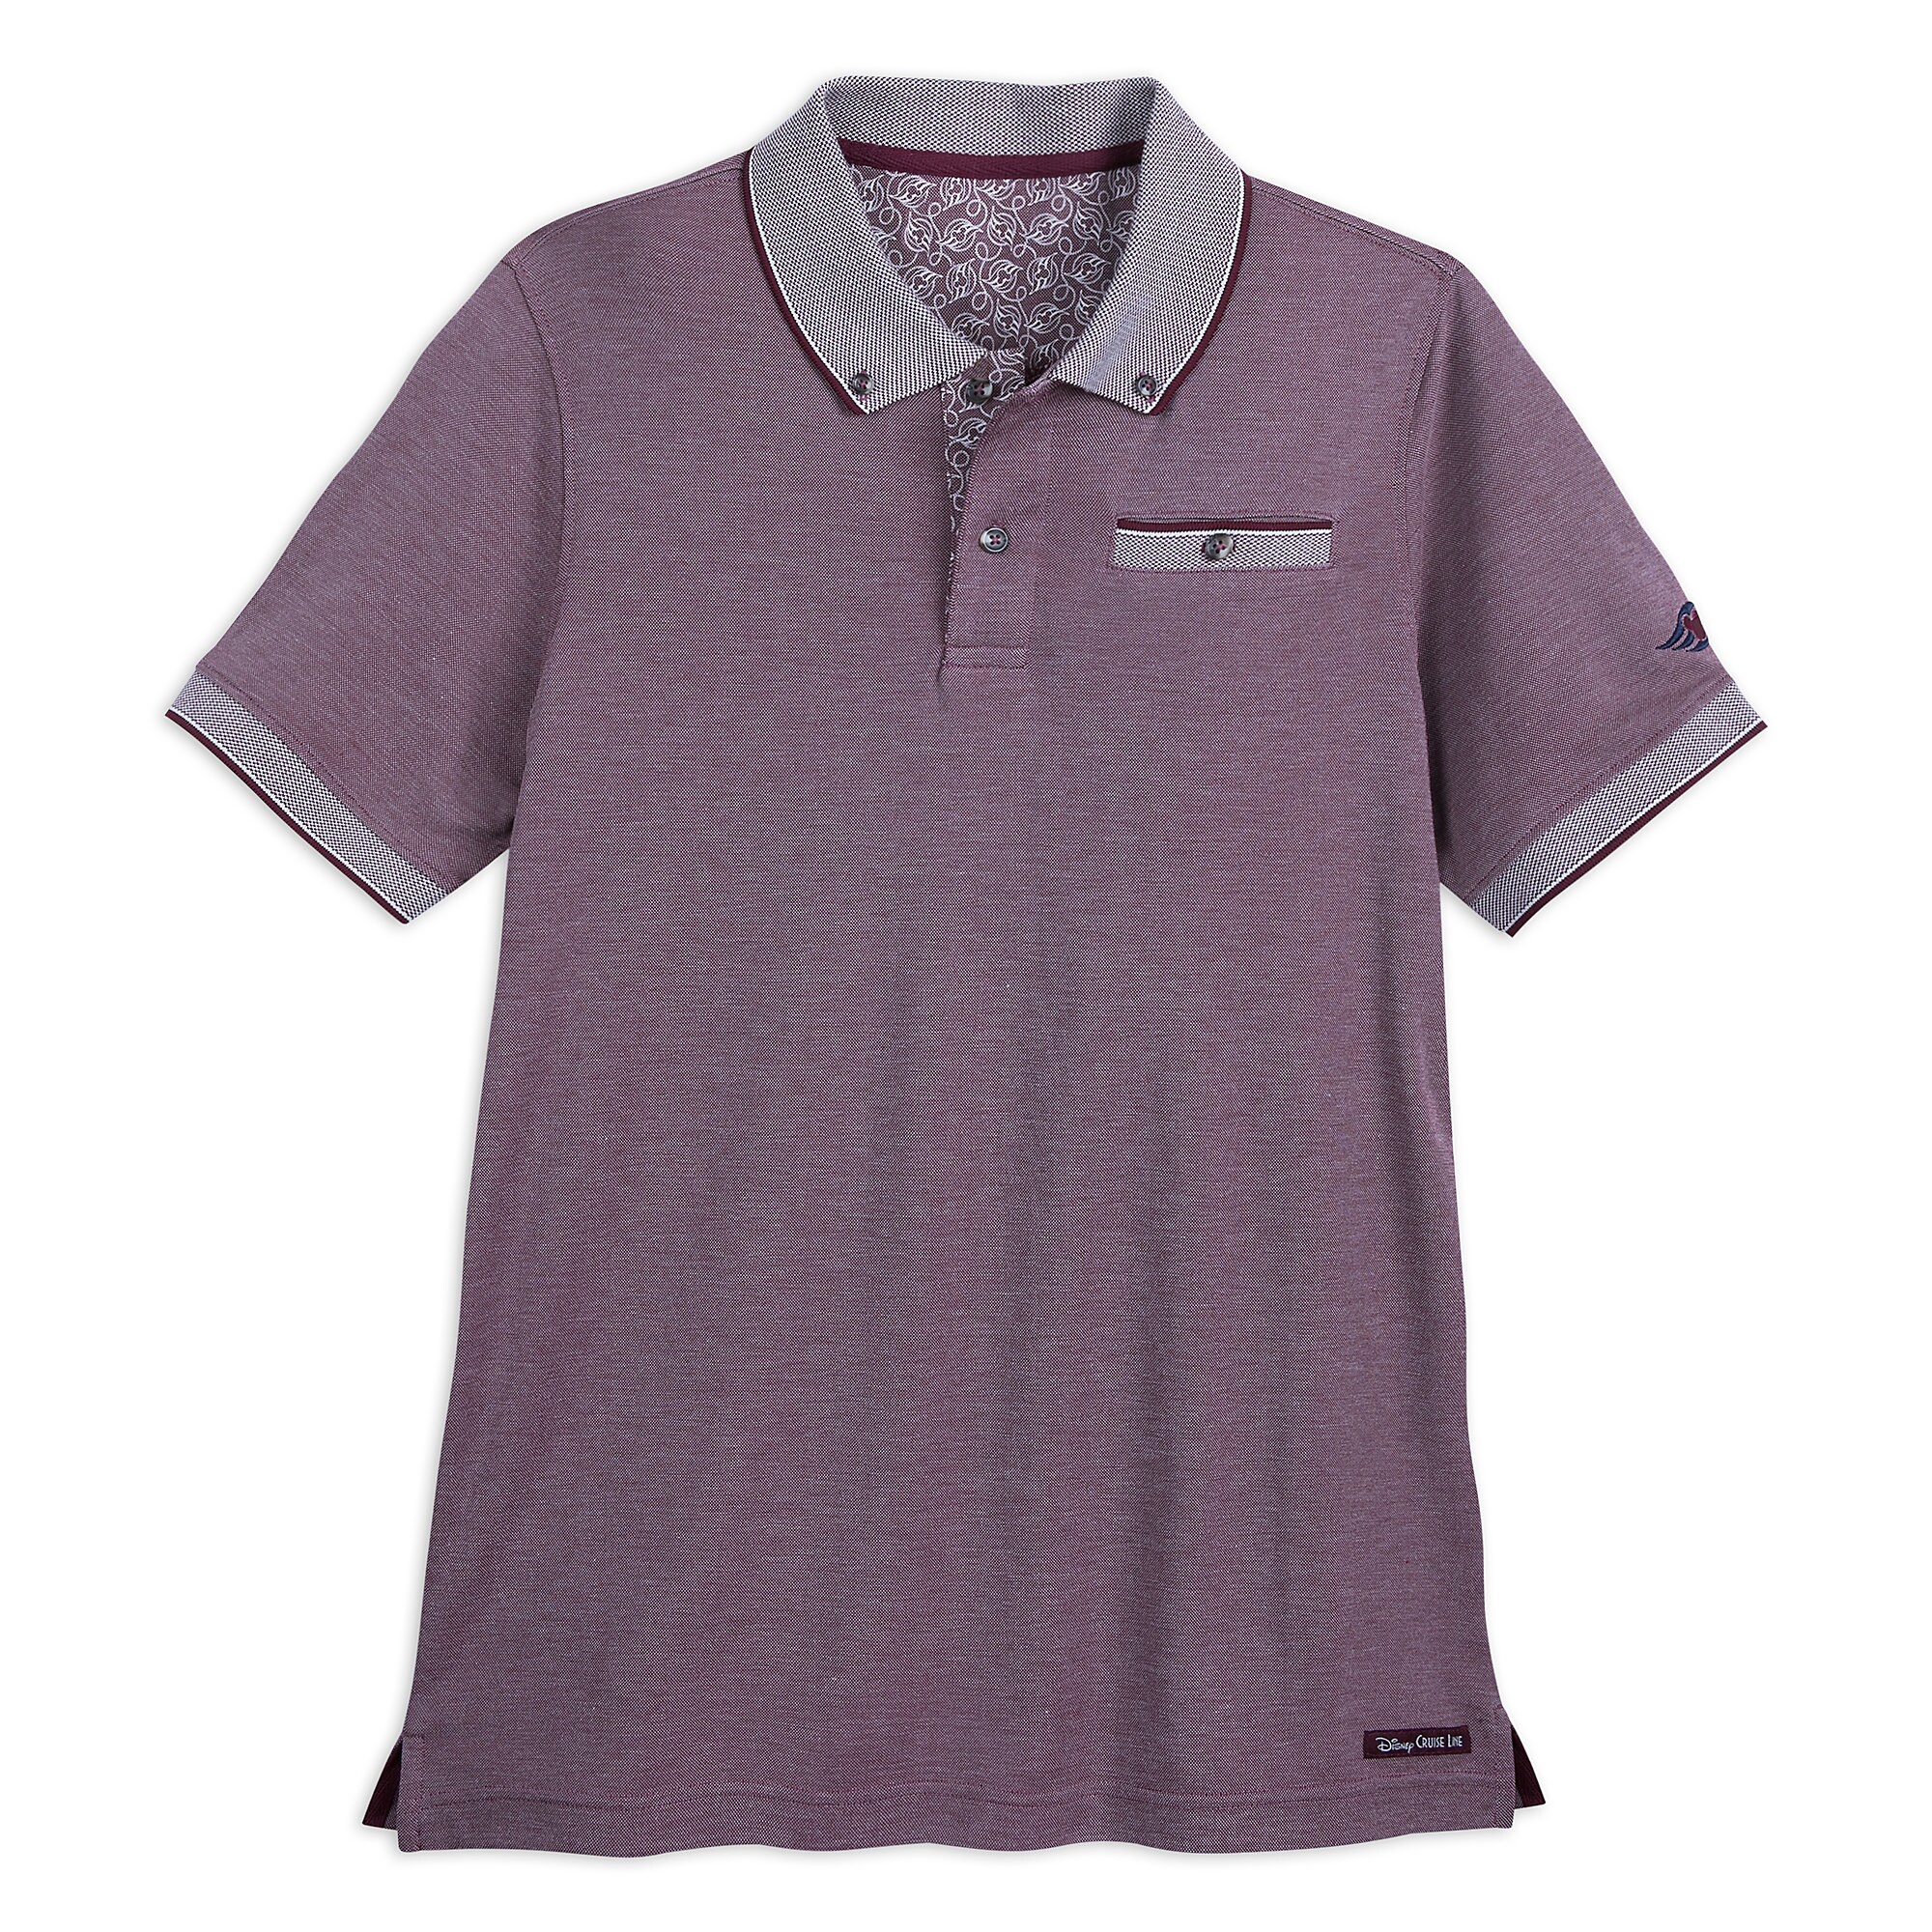 Disney Cruise Line Polo Shirt for Men is now available